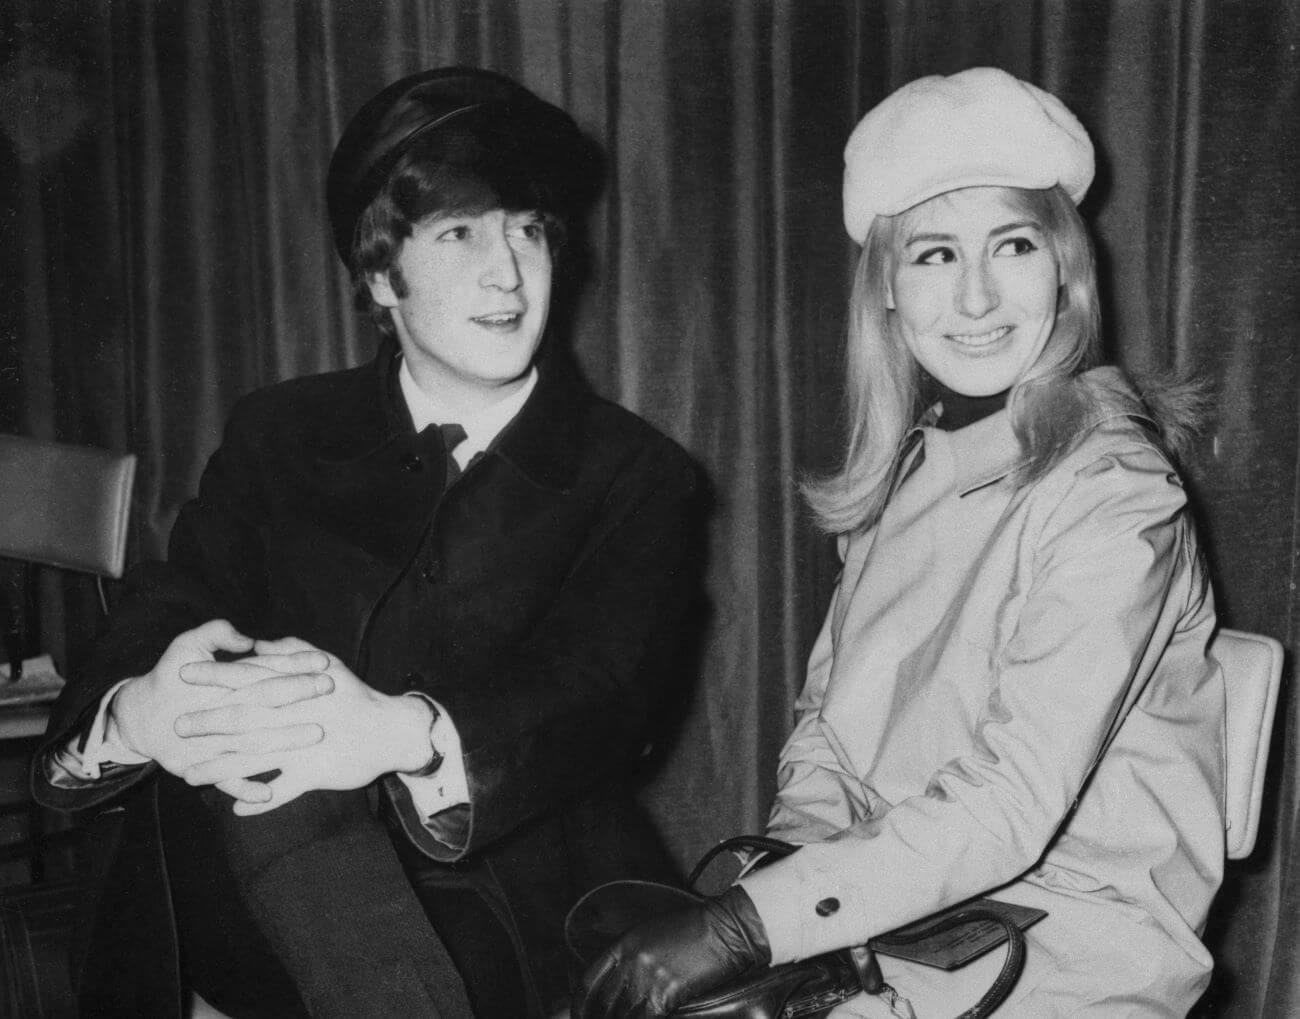 A black and white picture of John Lennon sitting with his hands clasped and his wife Cynthia Lennon wearing a hat and coat.